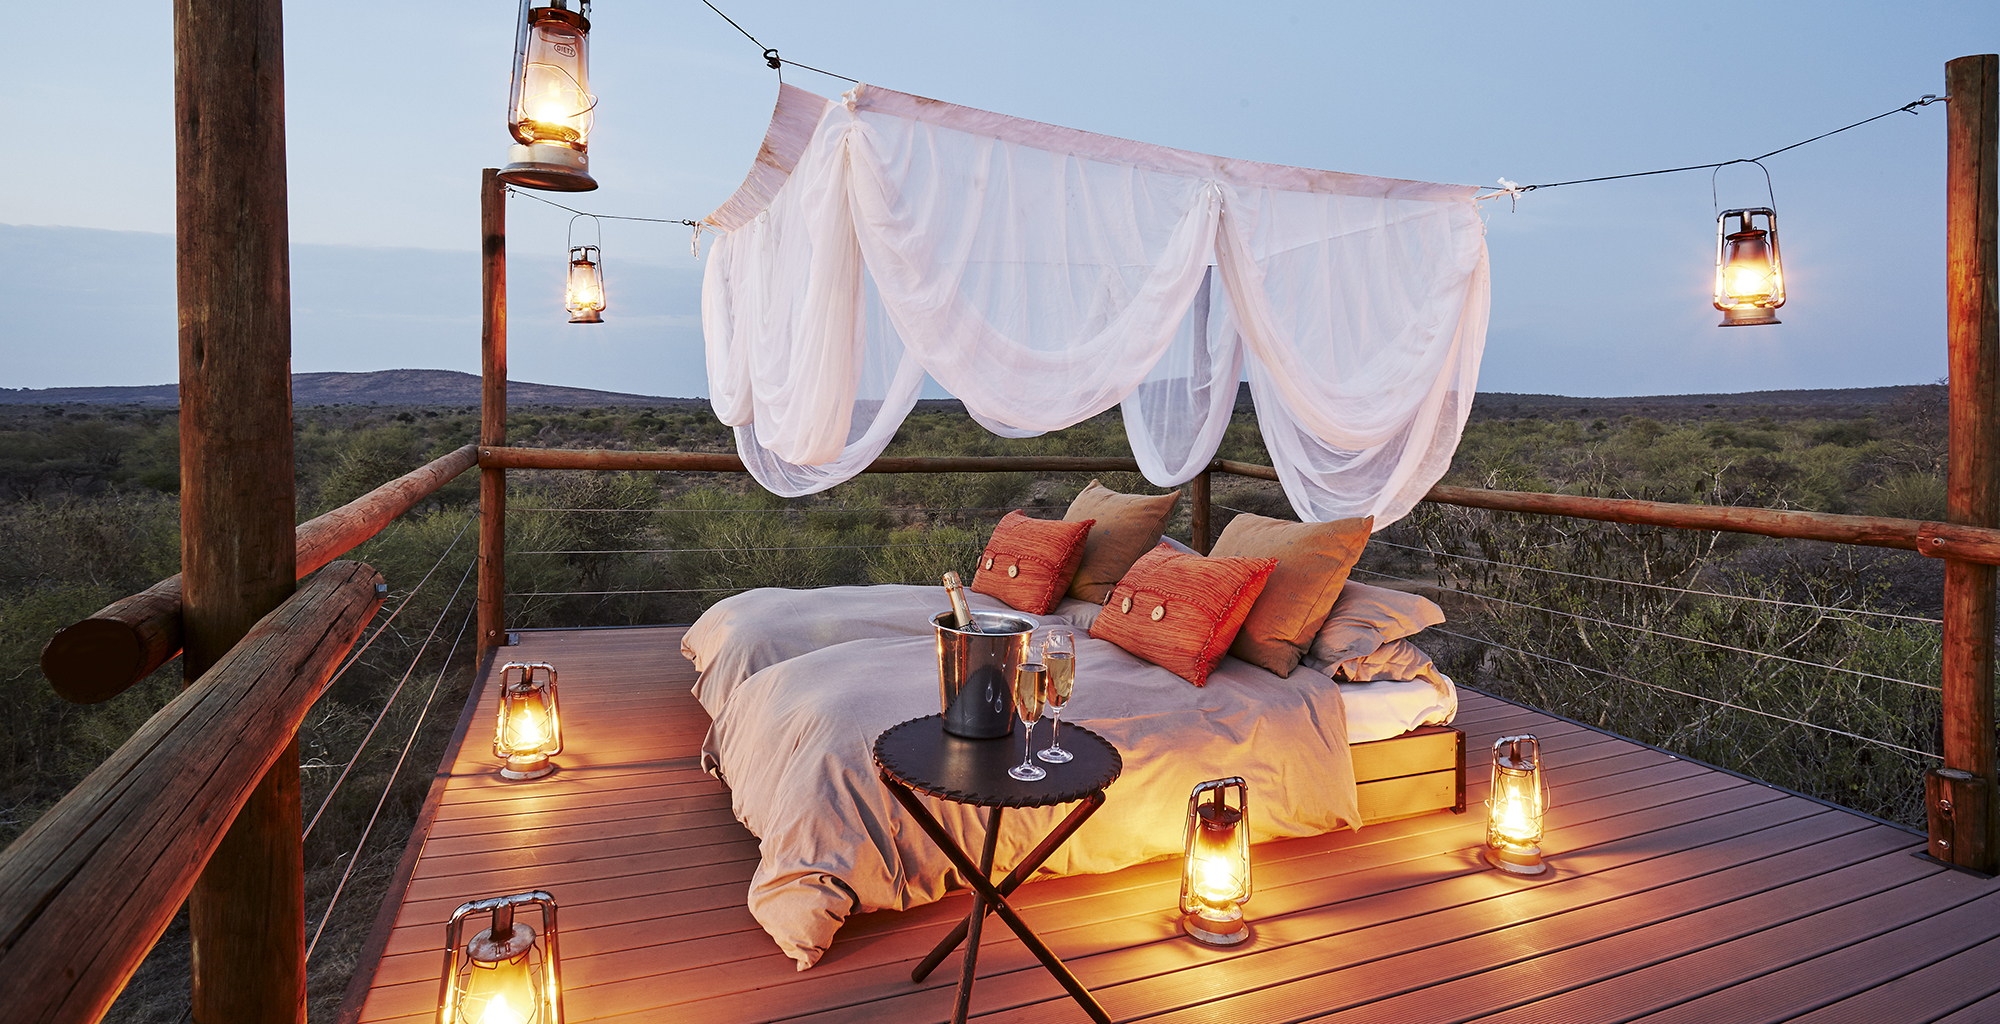 South-Africa-Makanyane-Lodge-Star-Bed